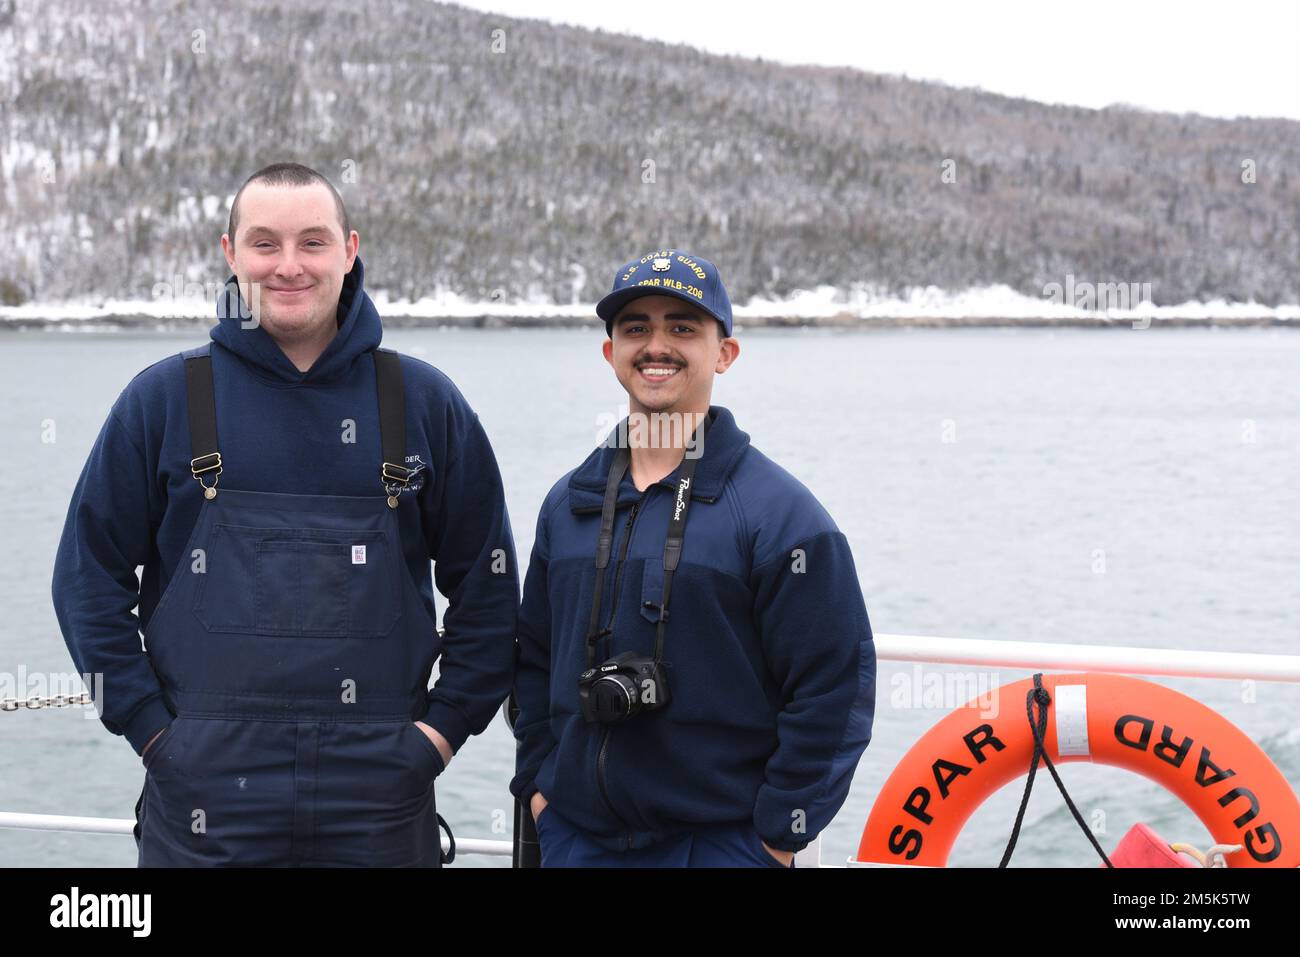 U.S. Coast Guard Petty Officer 3rd Class Frank Aurelio [left] and Seaman Alexander Landry, crew members aboard Coast Guard Cutter Spar, pose for a photo on the fantail while underway in the St. Lawrence River, March 21, 2022. Spar and her crew are traveling to Duluth, Minn. after a year-long maintenance period in Baltimore. Stock Photo